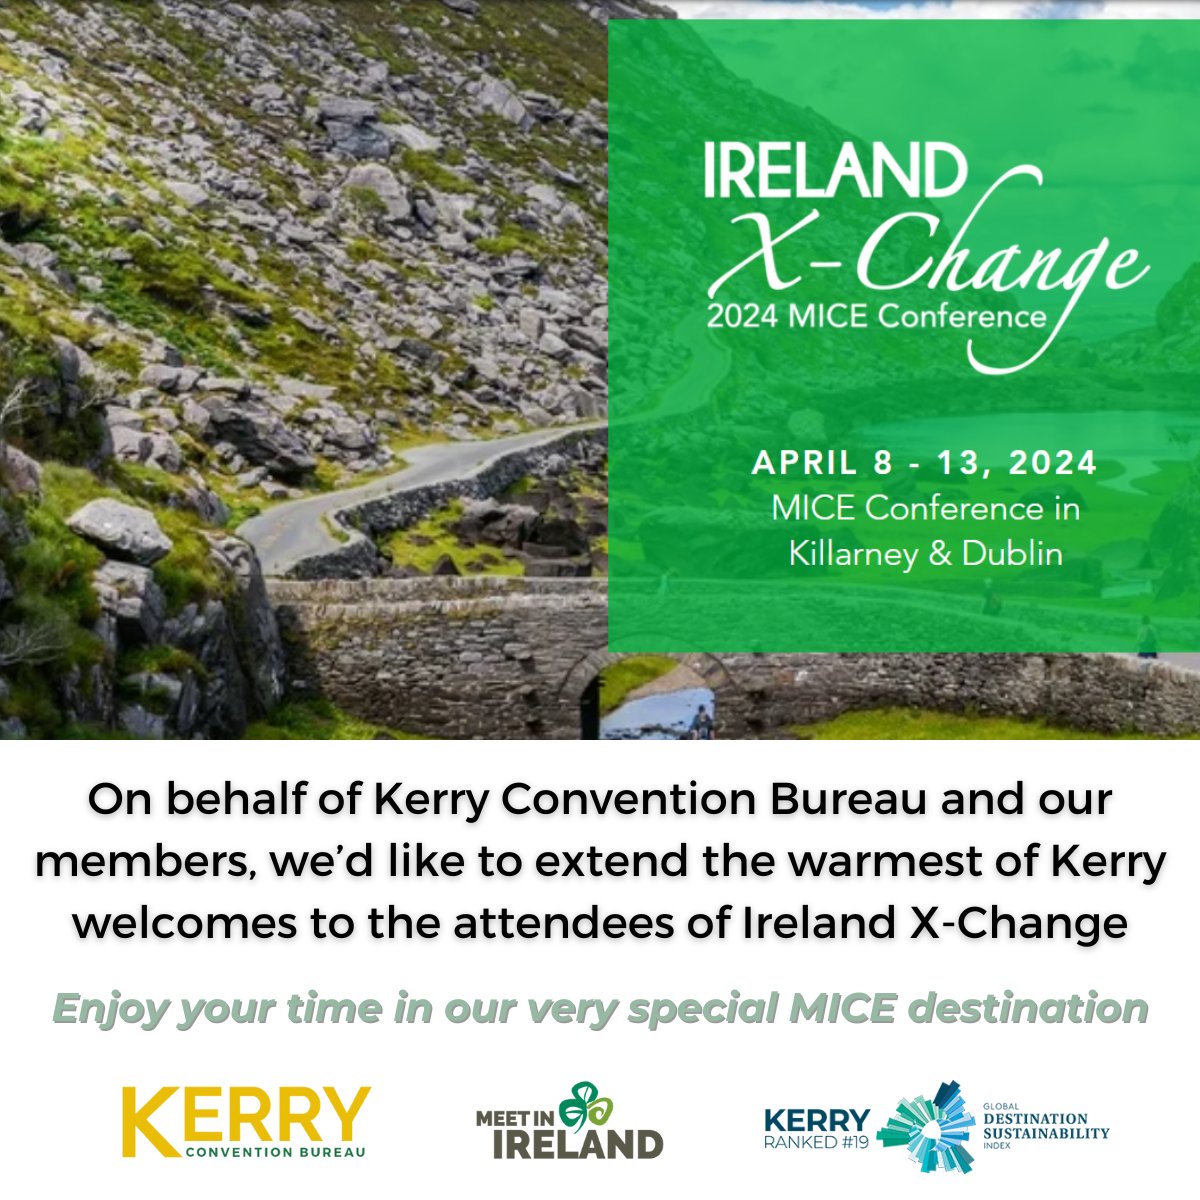 100 North American business event planners & global incentive suppliers are in Killarney for Ireland X-Change, brought together with support of @failte_ireland for one-to-one business meetings & networking.

We wish them all the very best as they #MakeItIreland & #MeetInKerry☘️